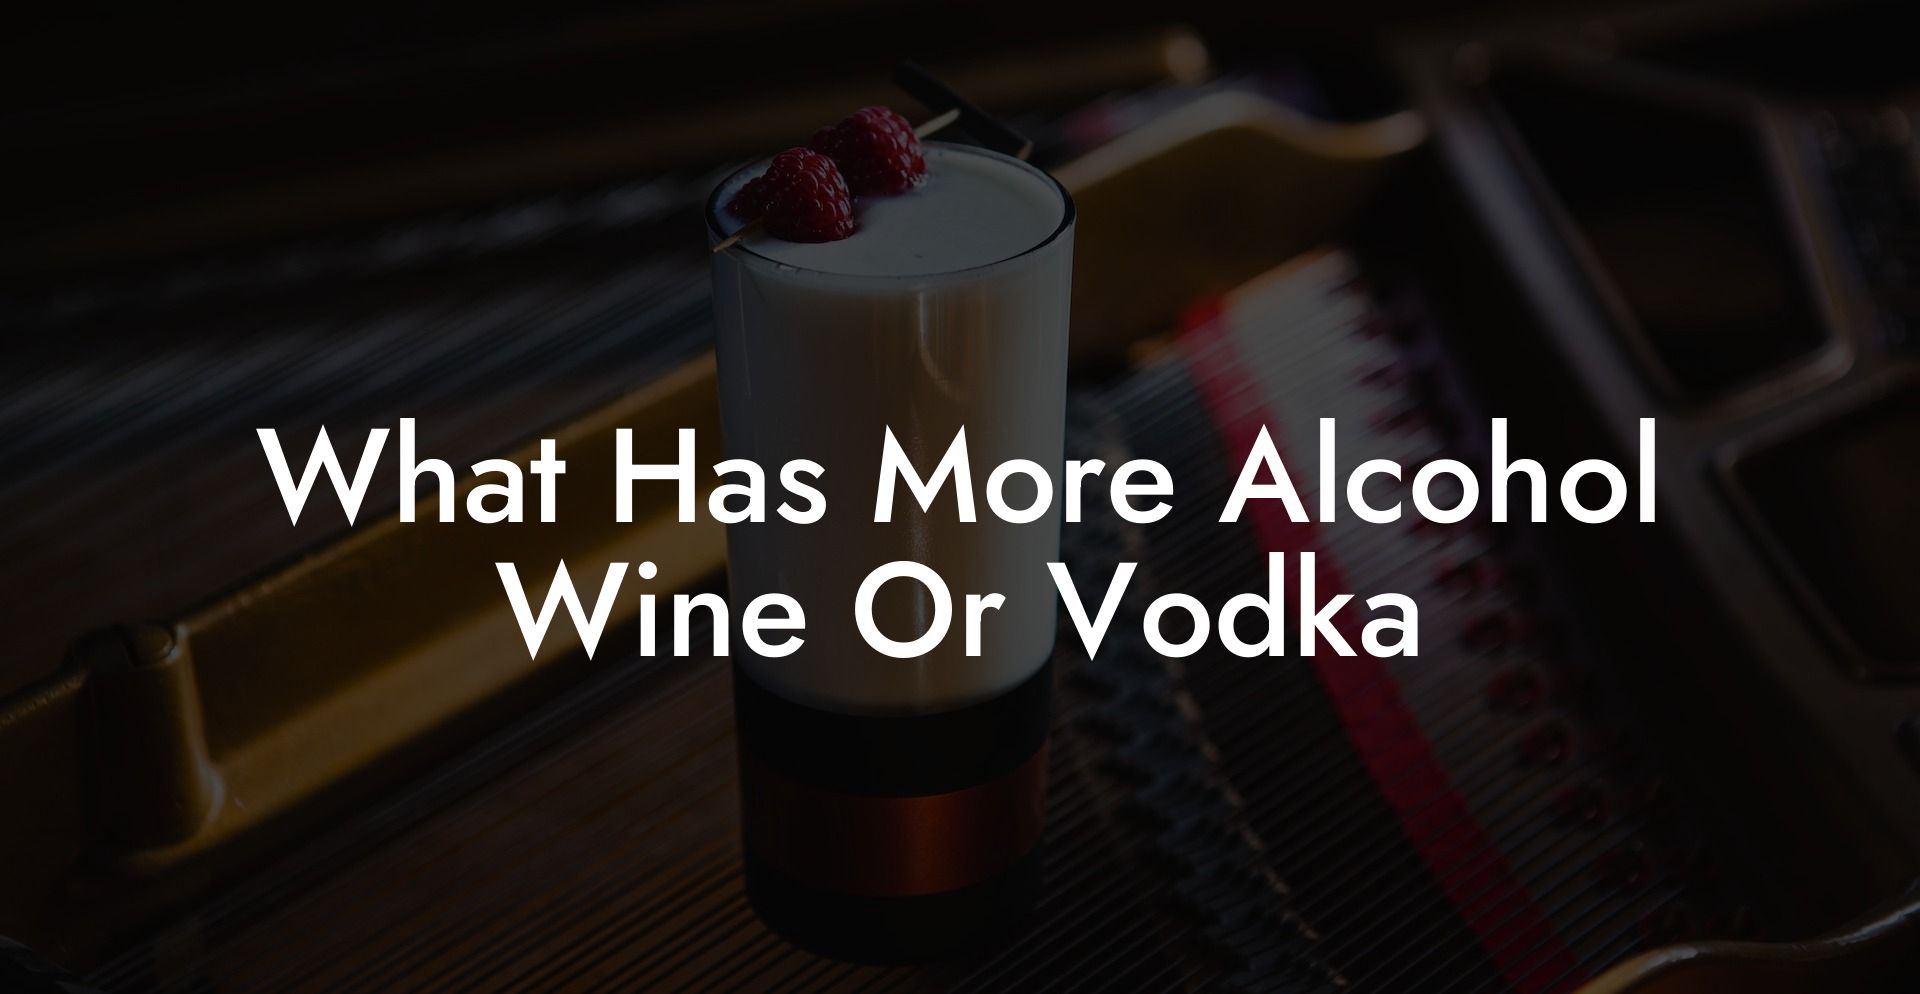 What Has More Alcohol Wine Or Vodka